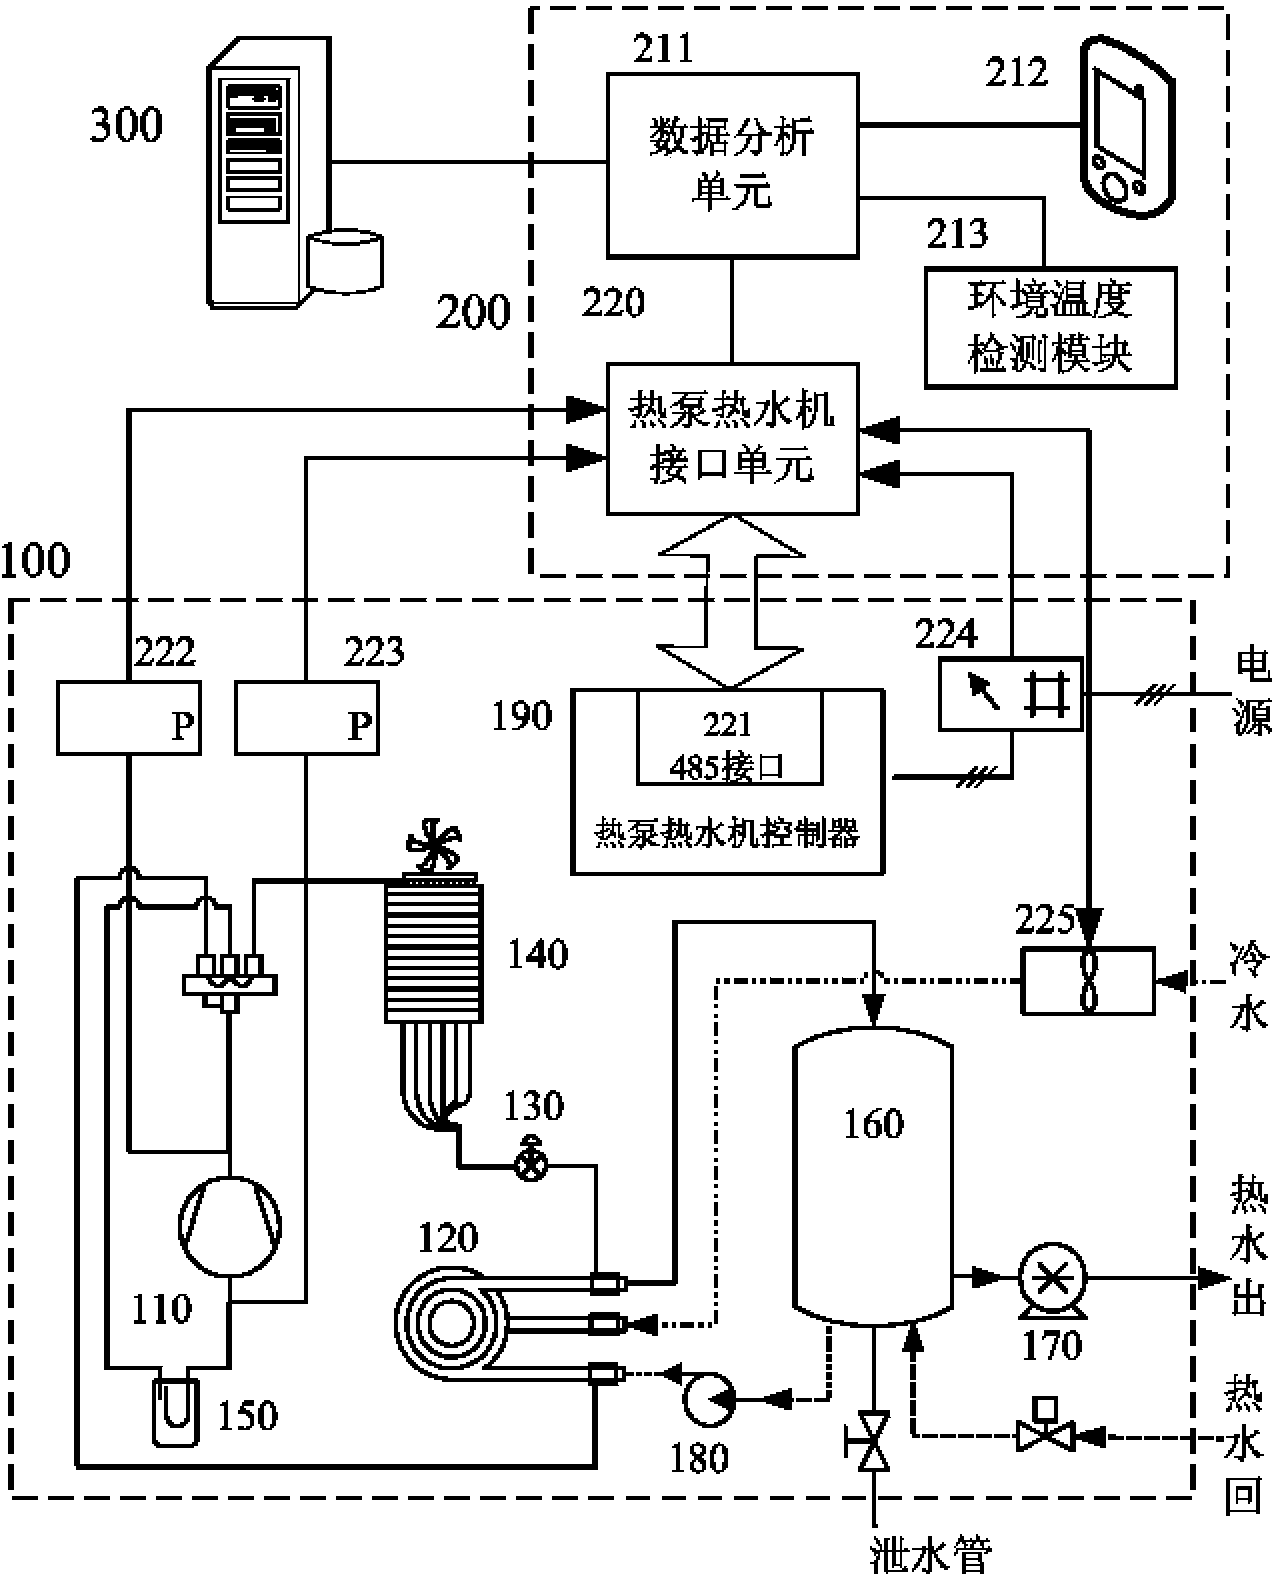 On-line self-diagnosis control method for heat pump water heater and on-line self-diagnosis control device of heat pump water heater